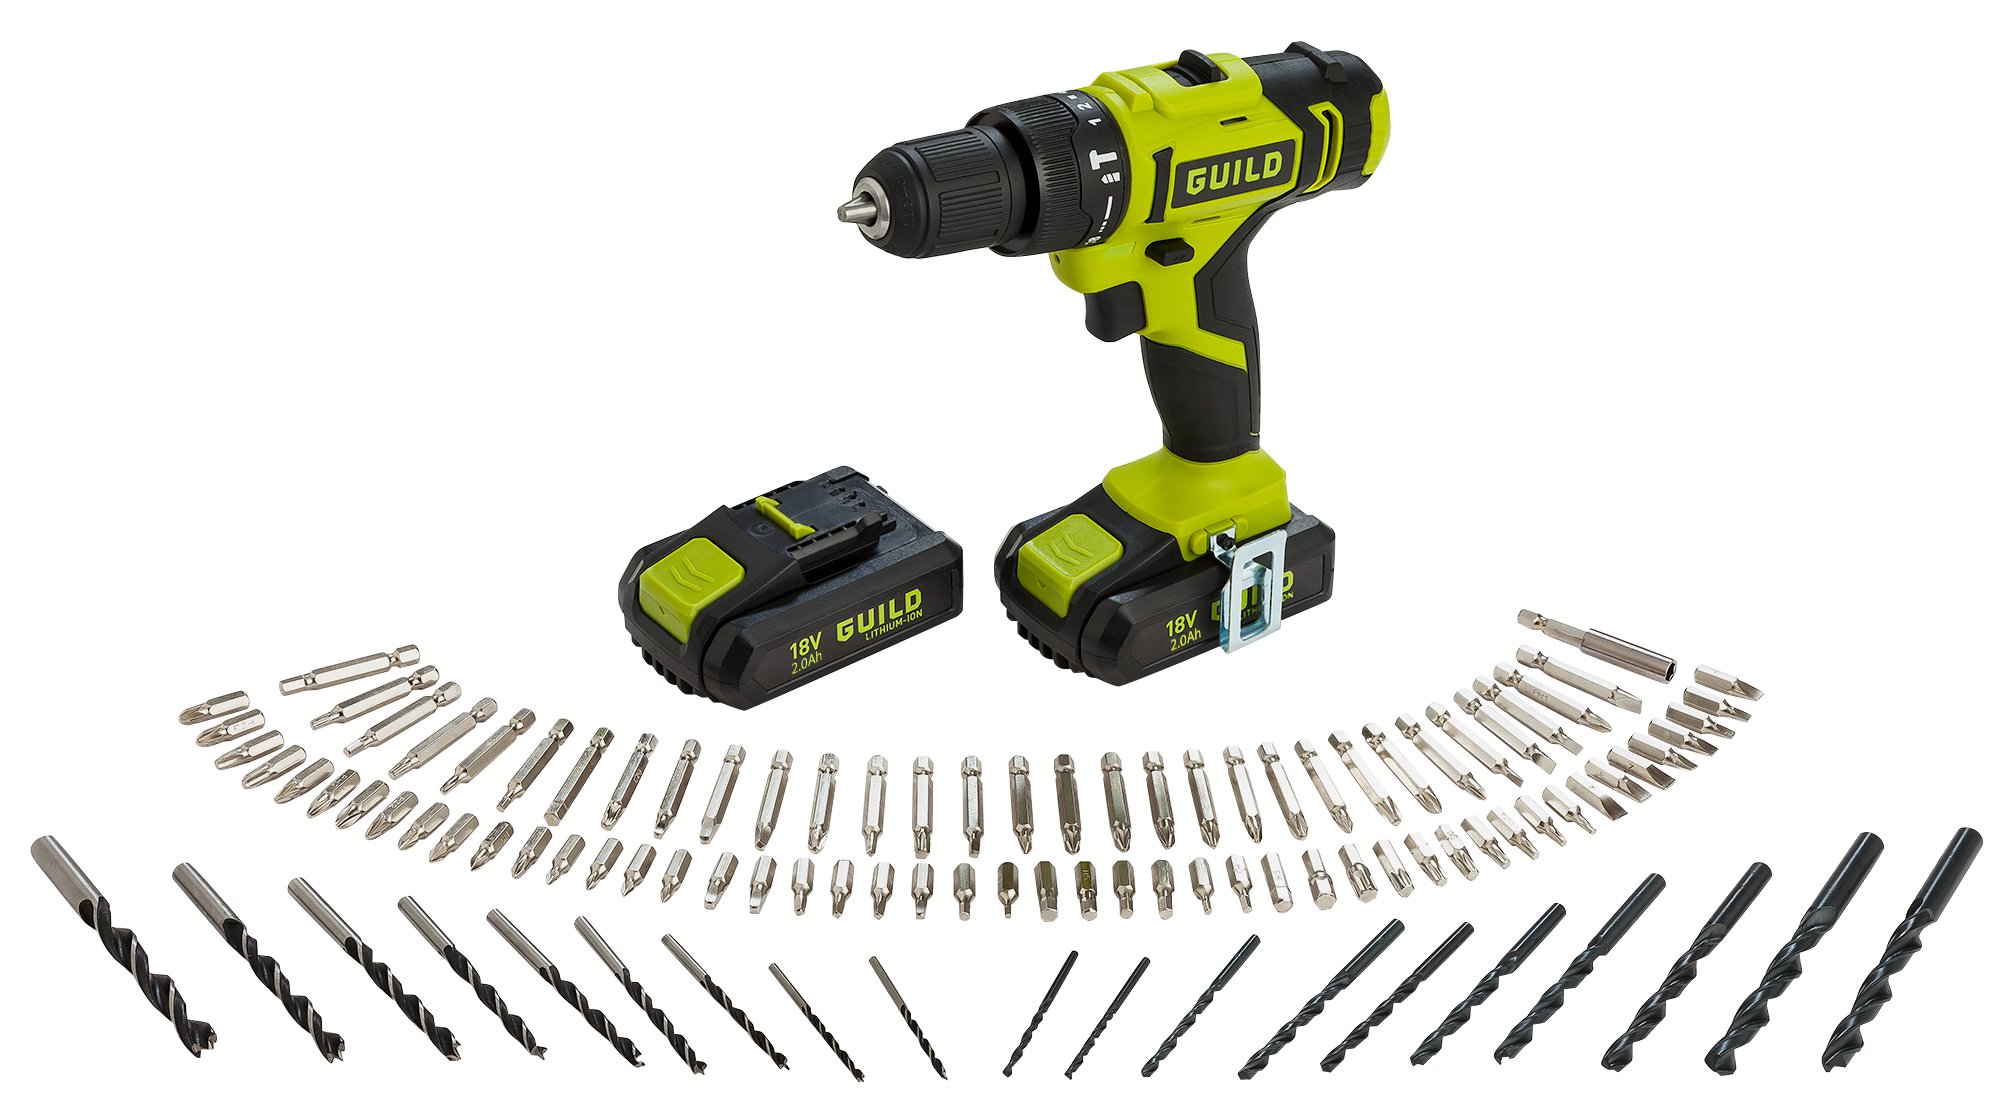 Guild 2.0AH Cordless Impact Drill And 100 Accessories - 18V